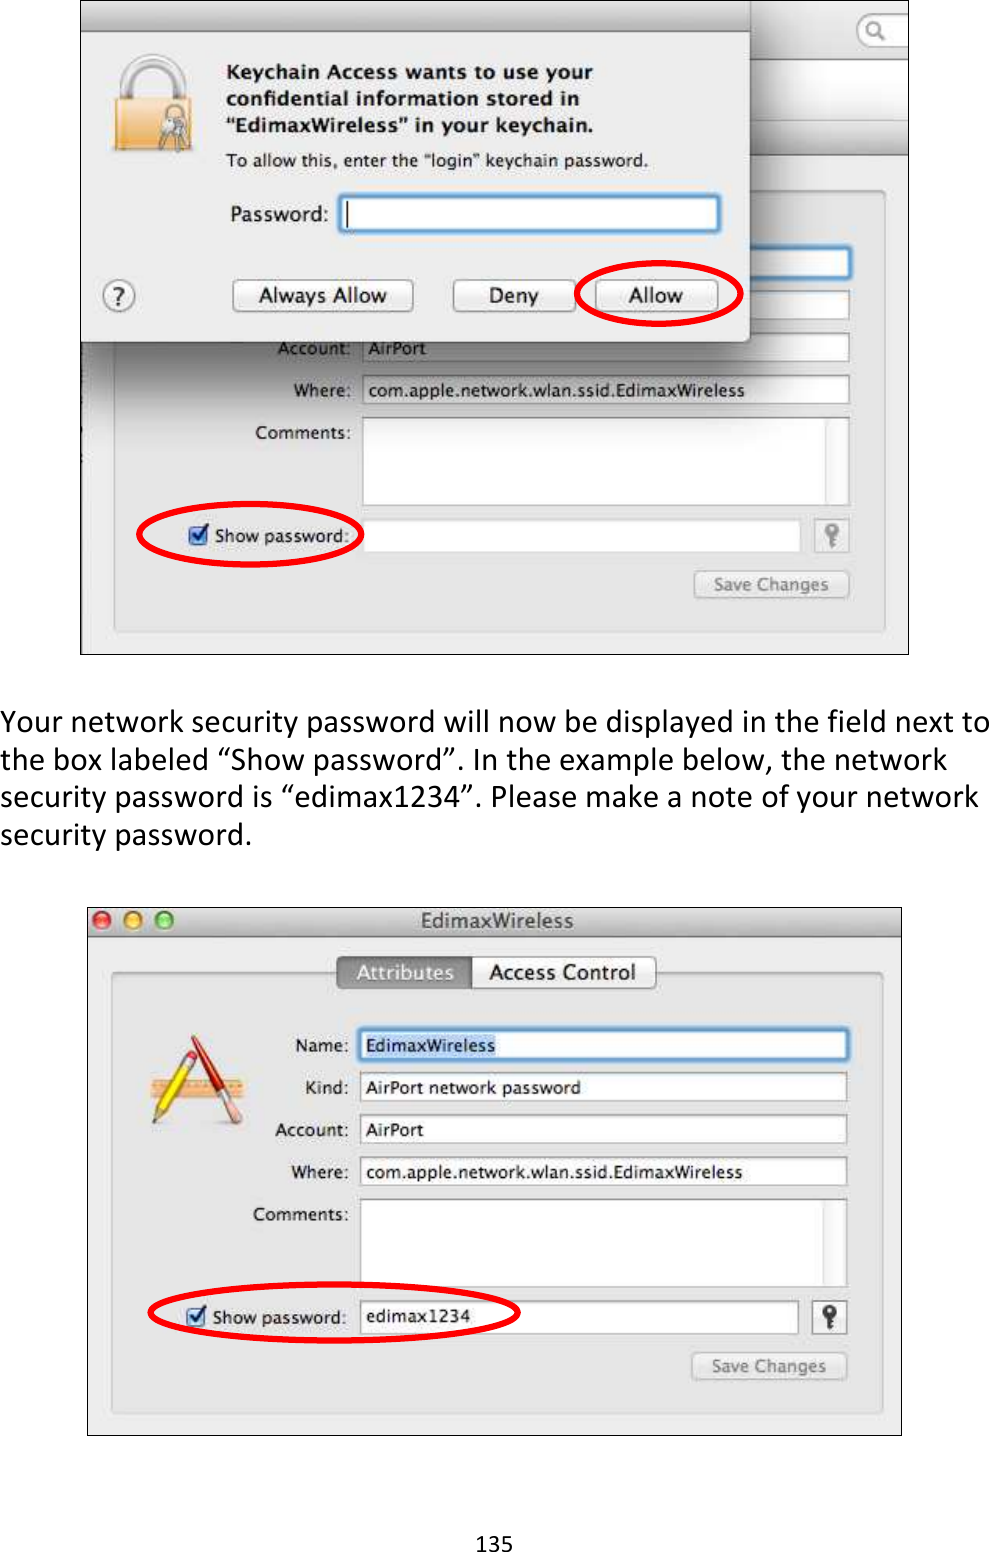 135    Your network security password will now be displayed in the field next to the box labeled “Show password”. In the example below, the network security password is “edimax1234”. Please make a note of your network security password.    